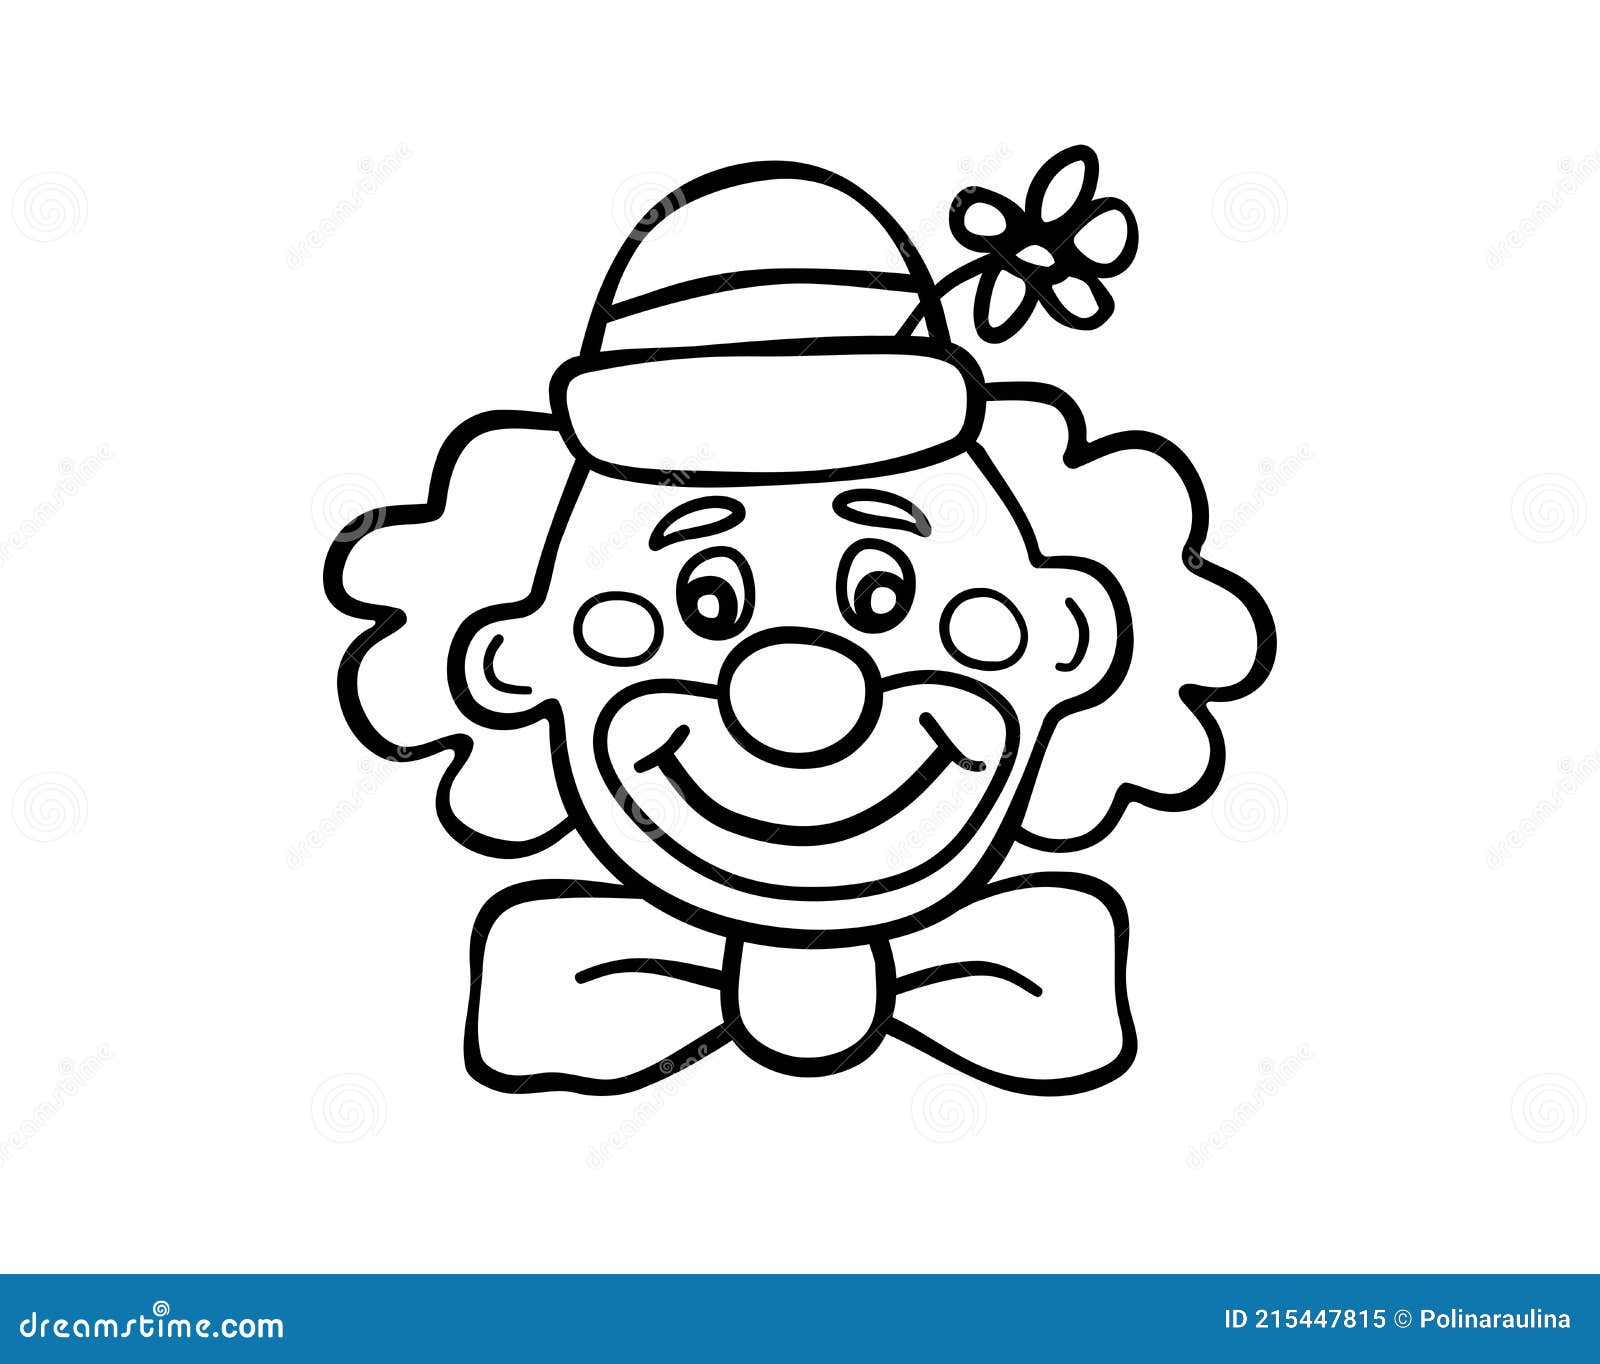 Clown Face coloring page | Free Printable Coloring Pages